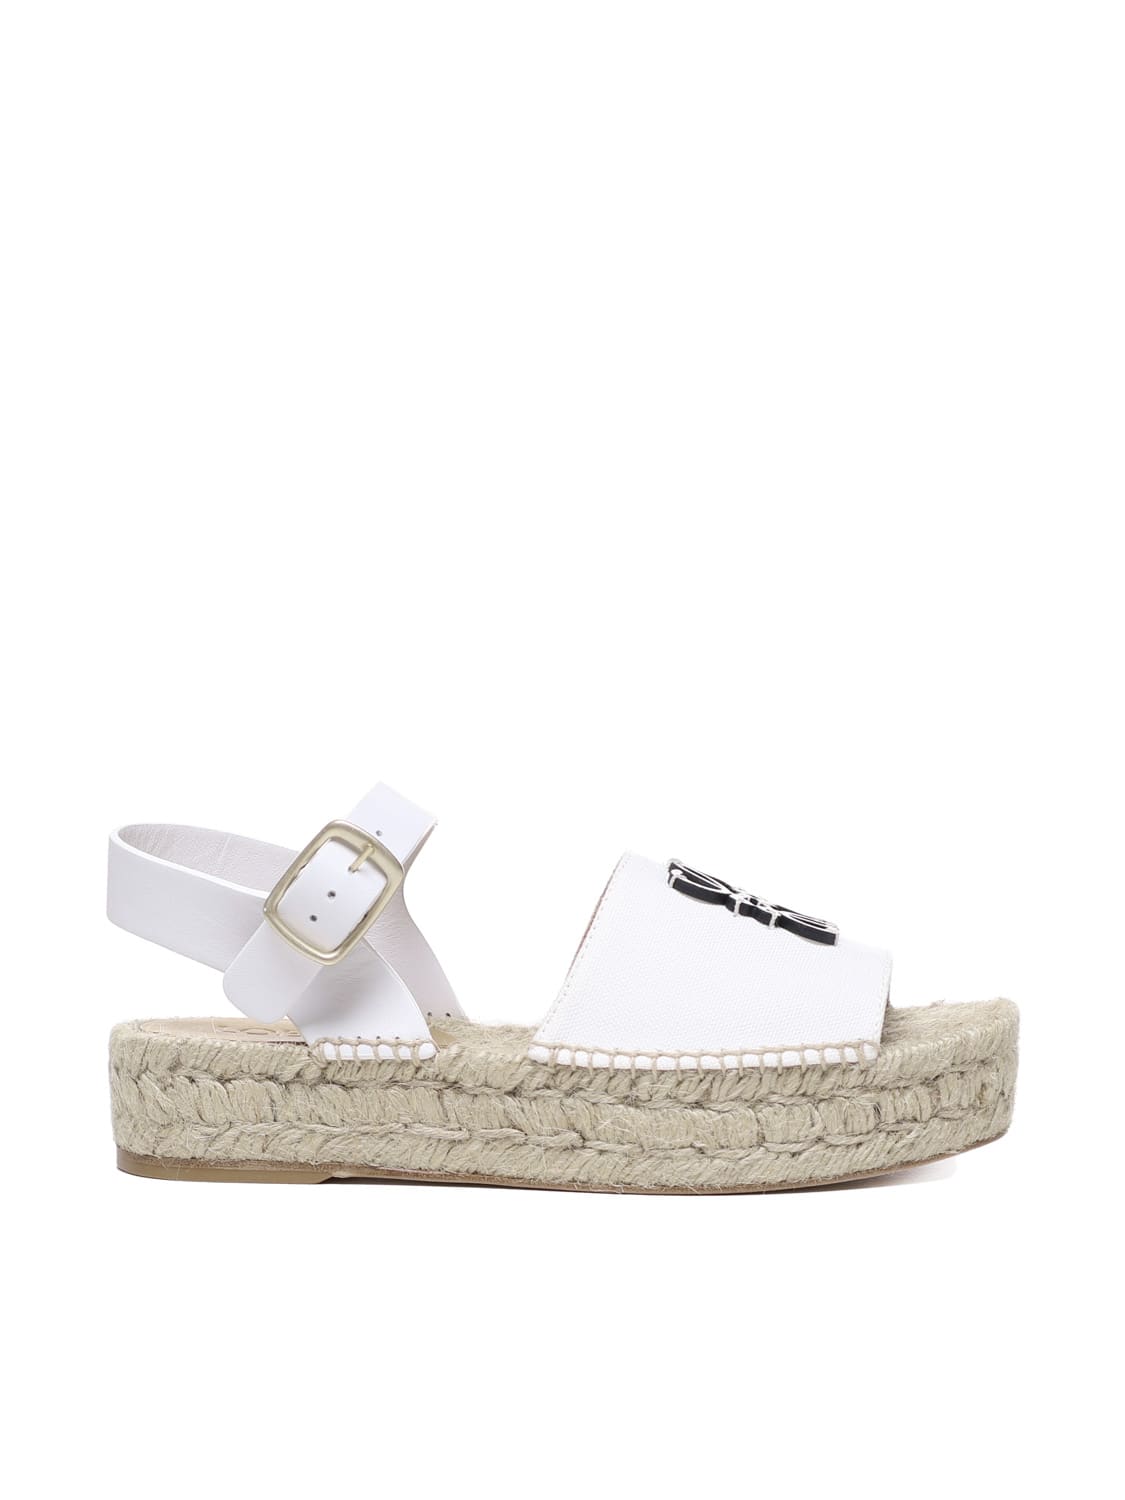 Loewe Anagram Espadrilles In Canvas And Calfskin In White